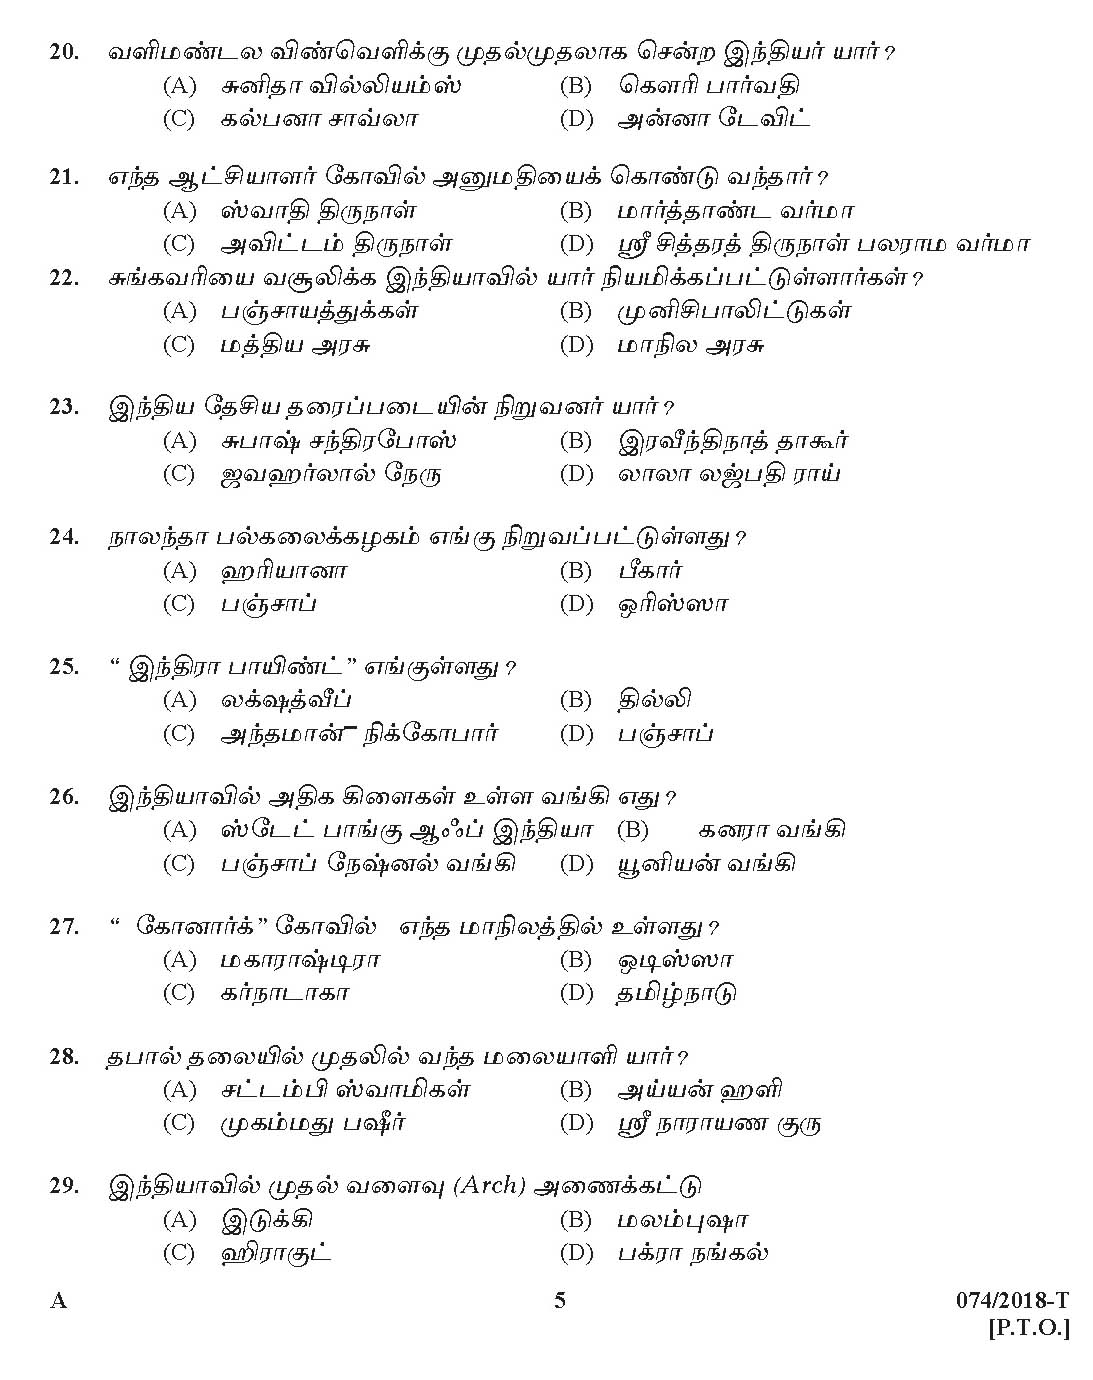 Kerala PSC Police Constable Driver Exam 2018 Question Paper Code 0742018 T 4